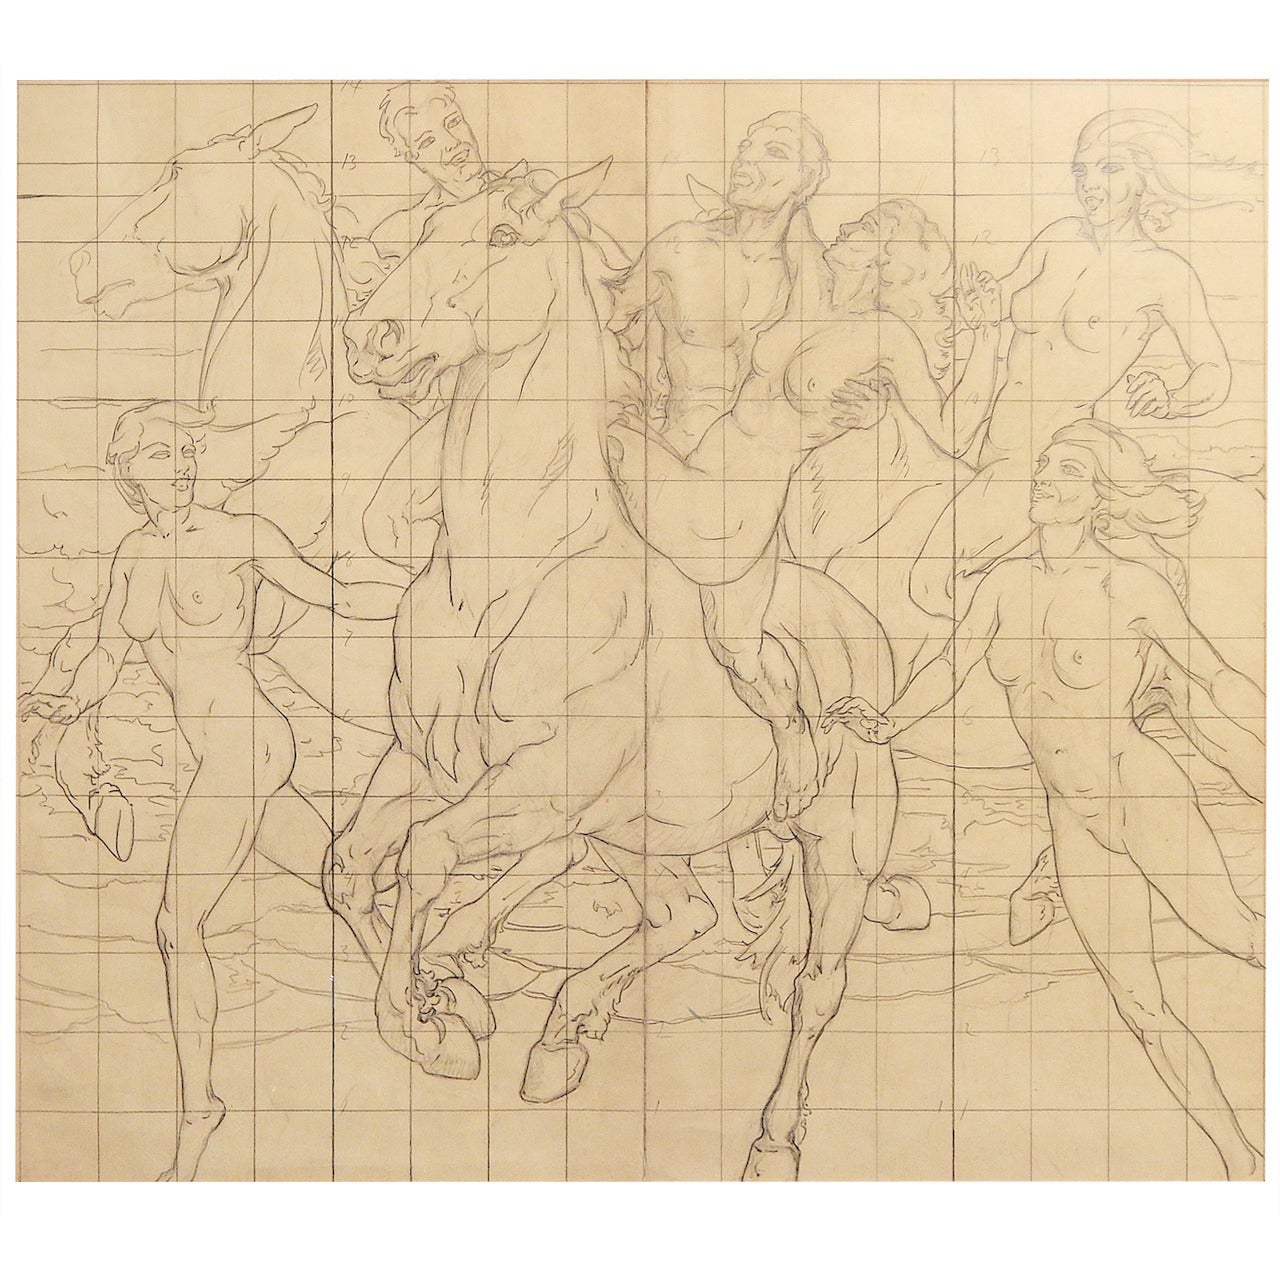 "Frolic on Horseback, " Mural Study w/ Nudes by Kenneth MacIntire For Sale